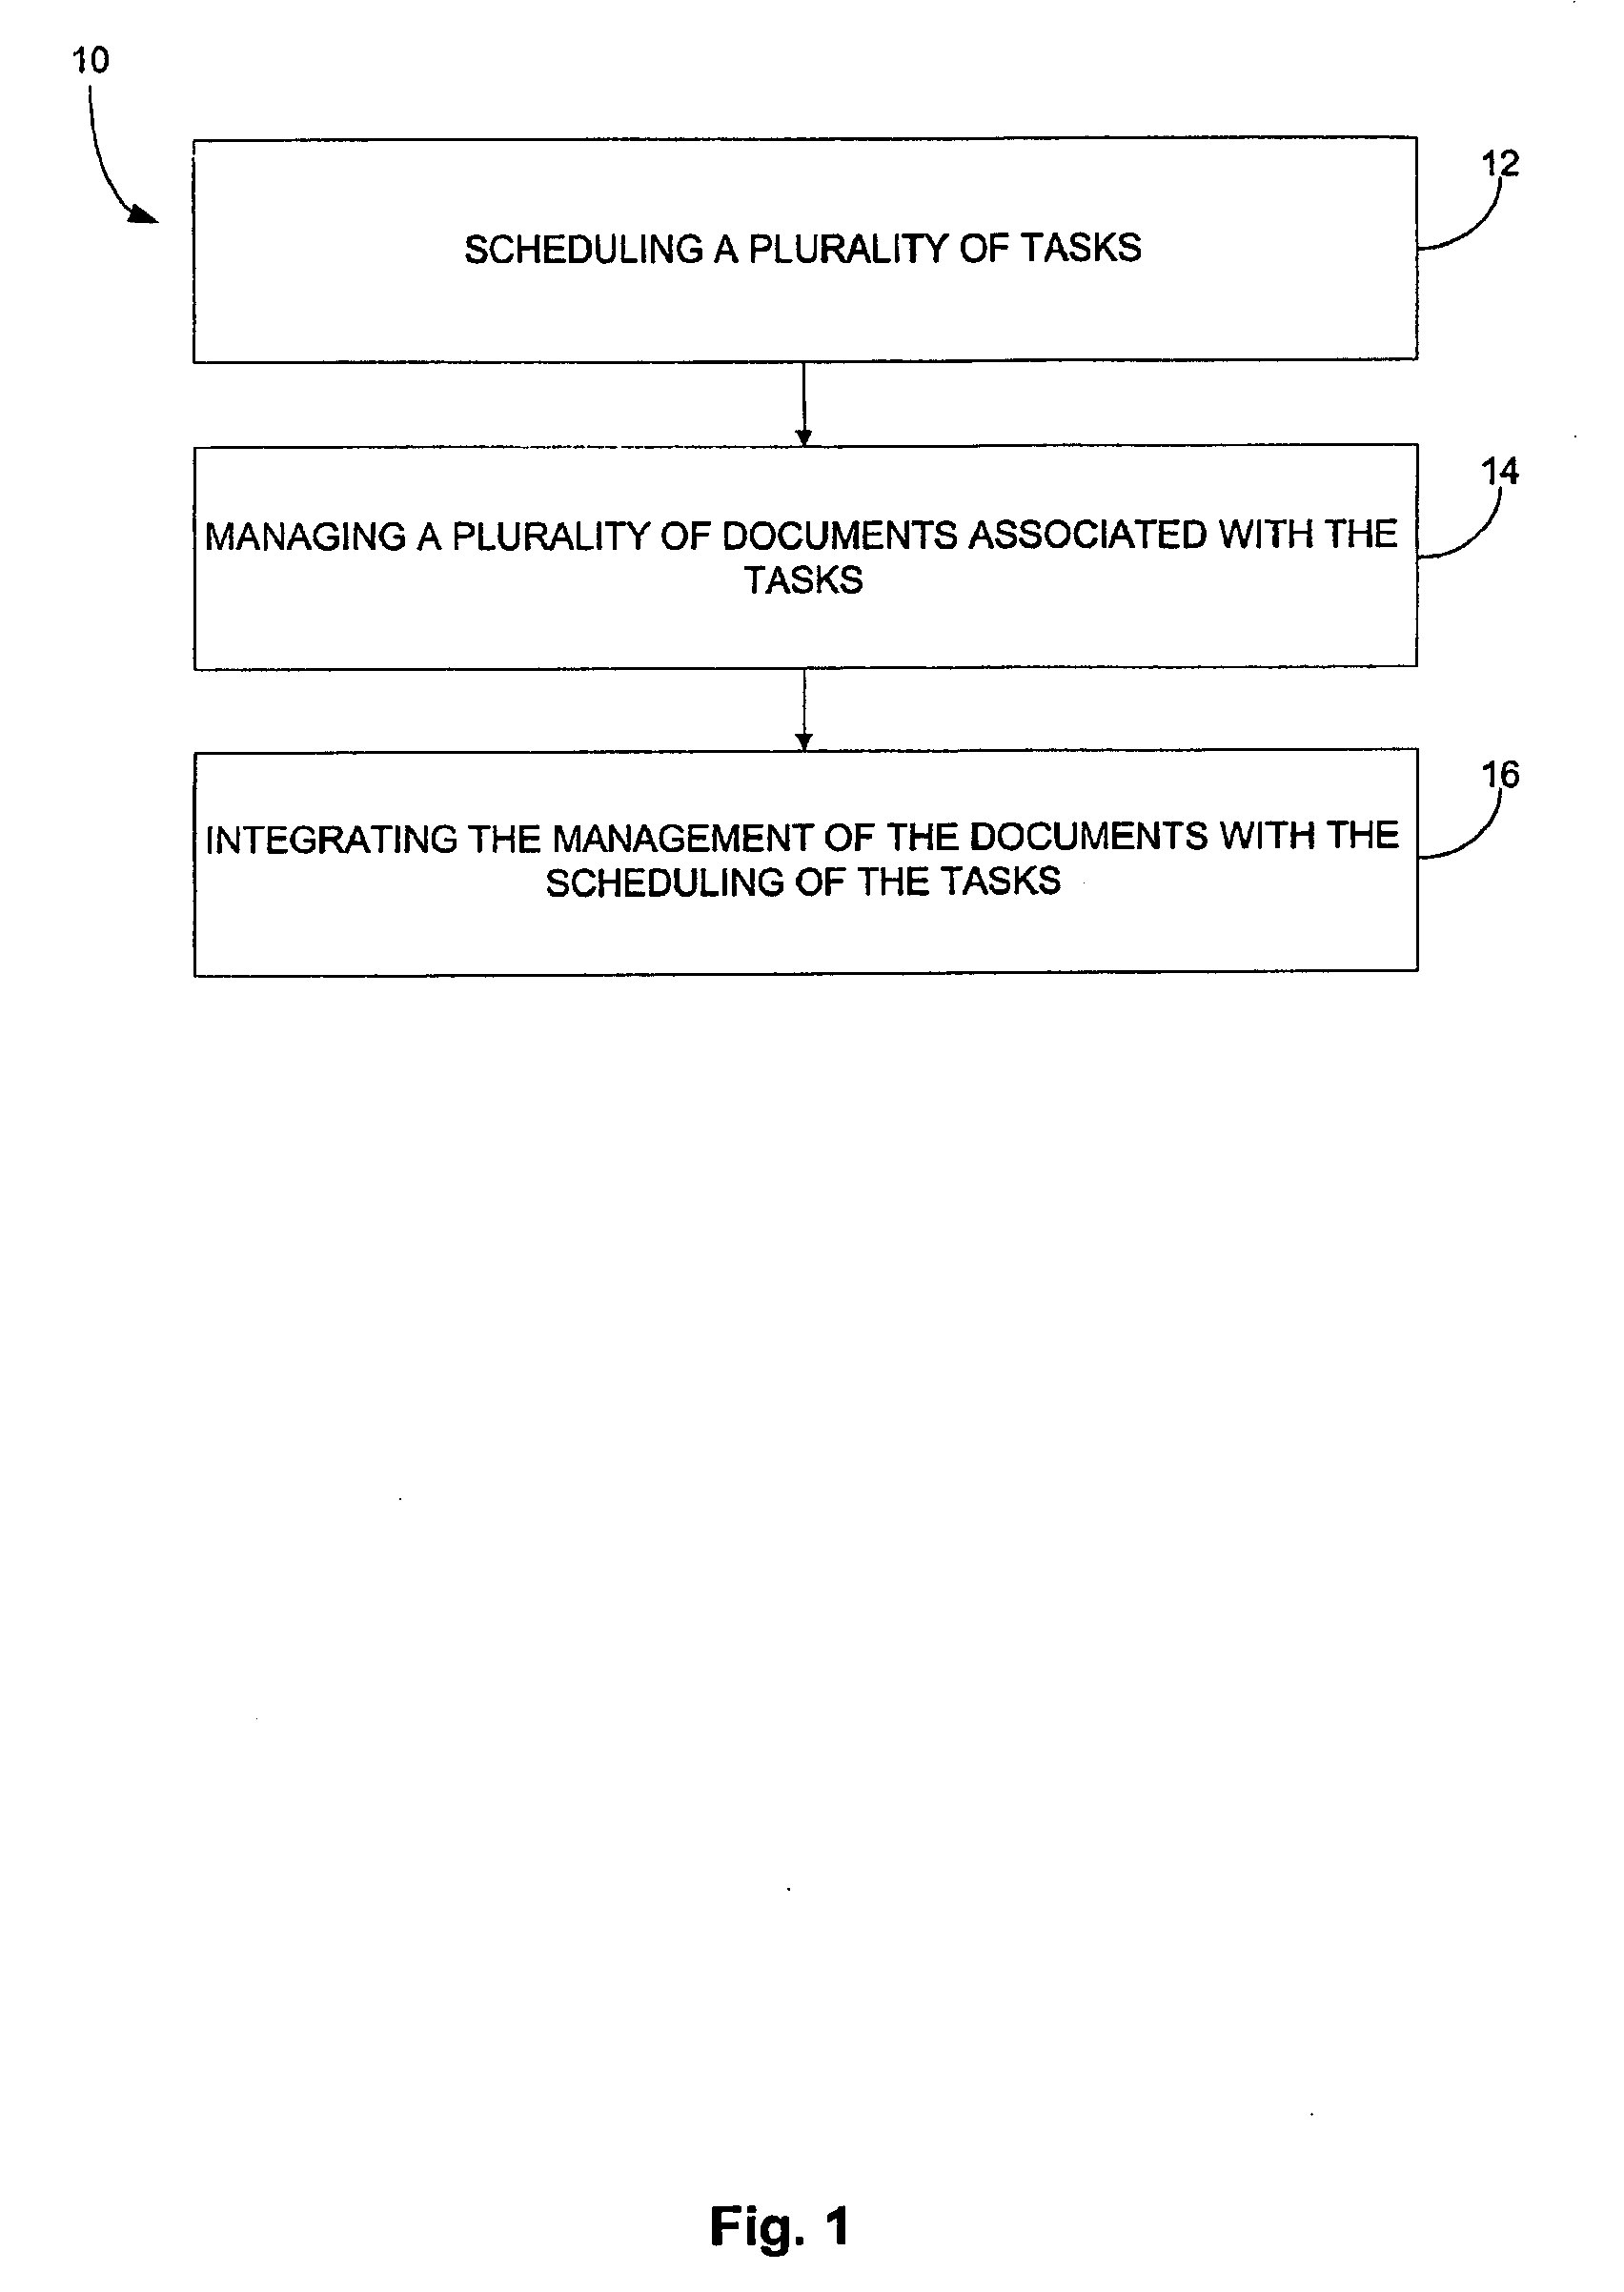 System, method, and article of manufacture for scheduling and document management integration